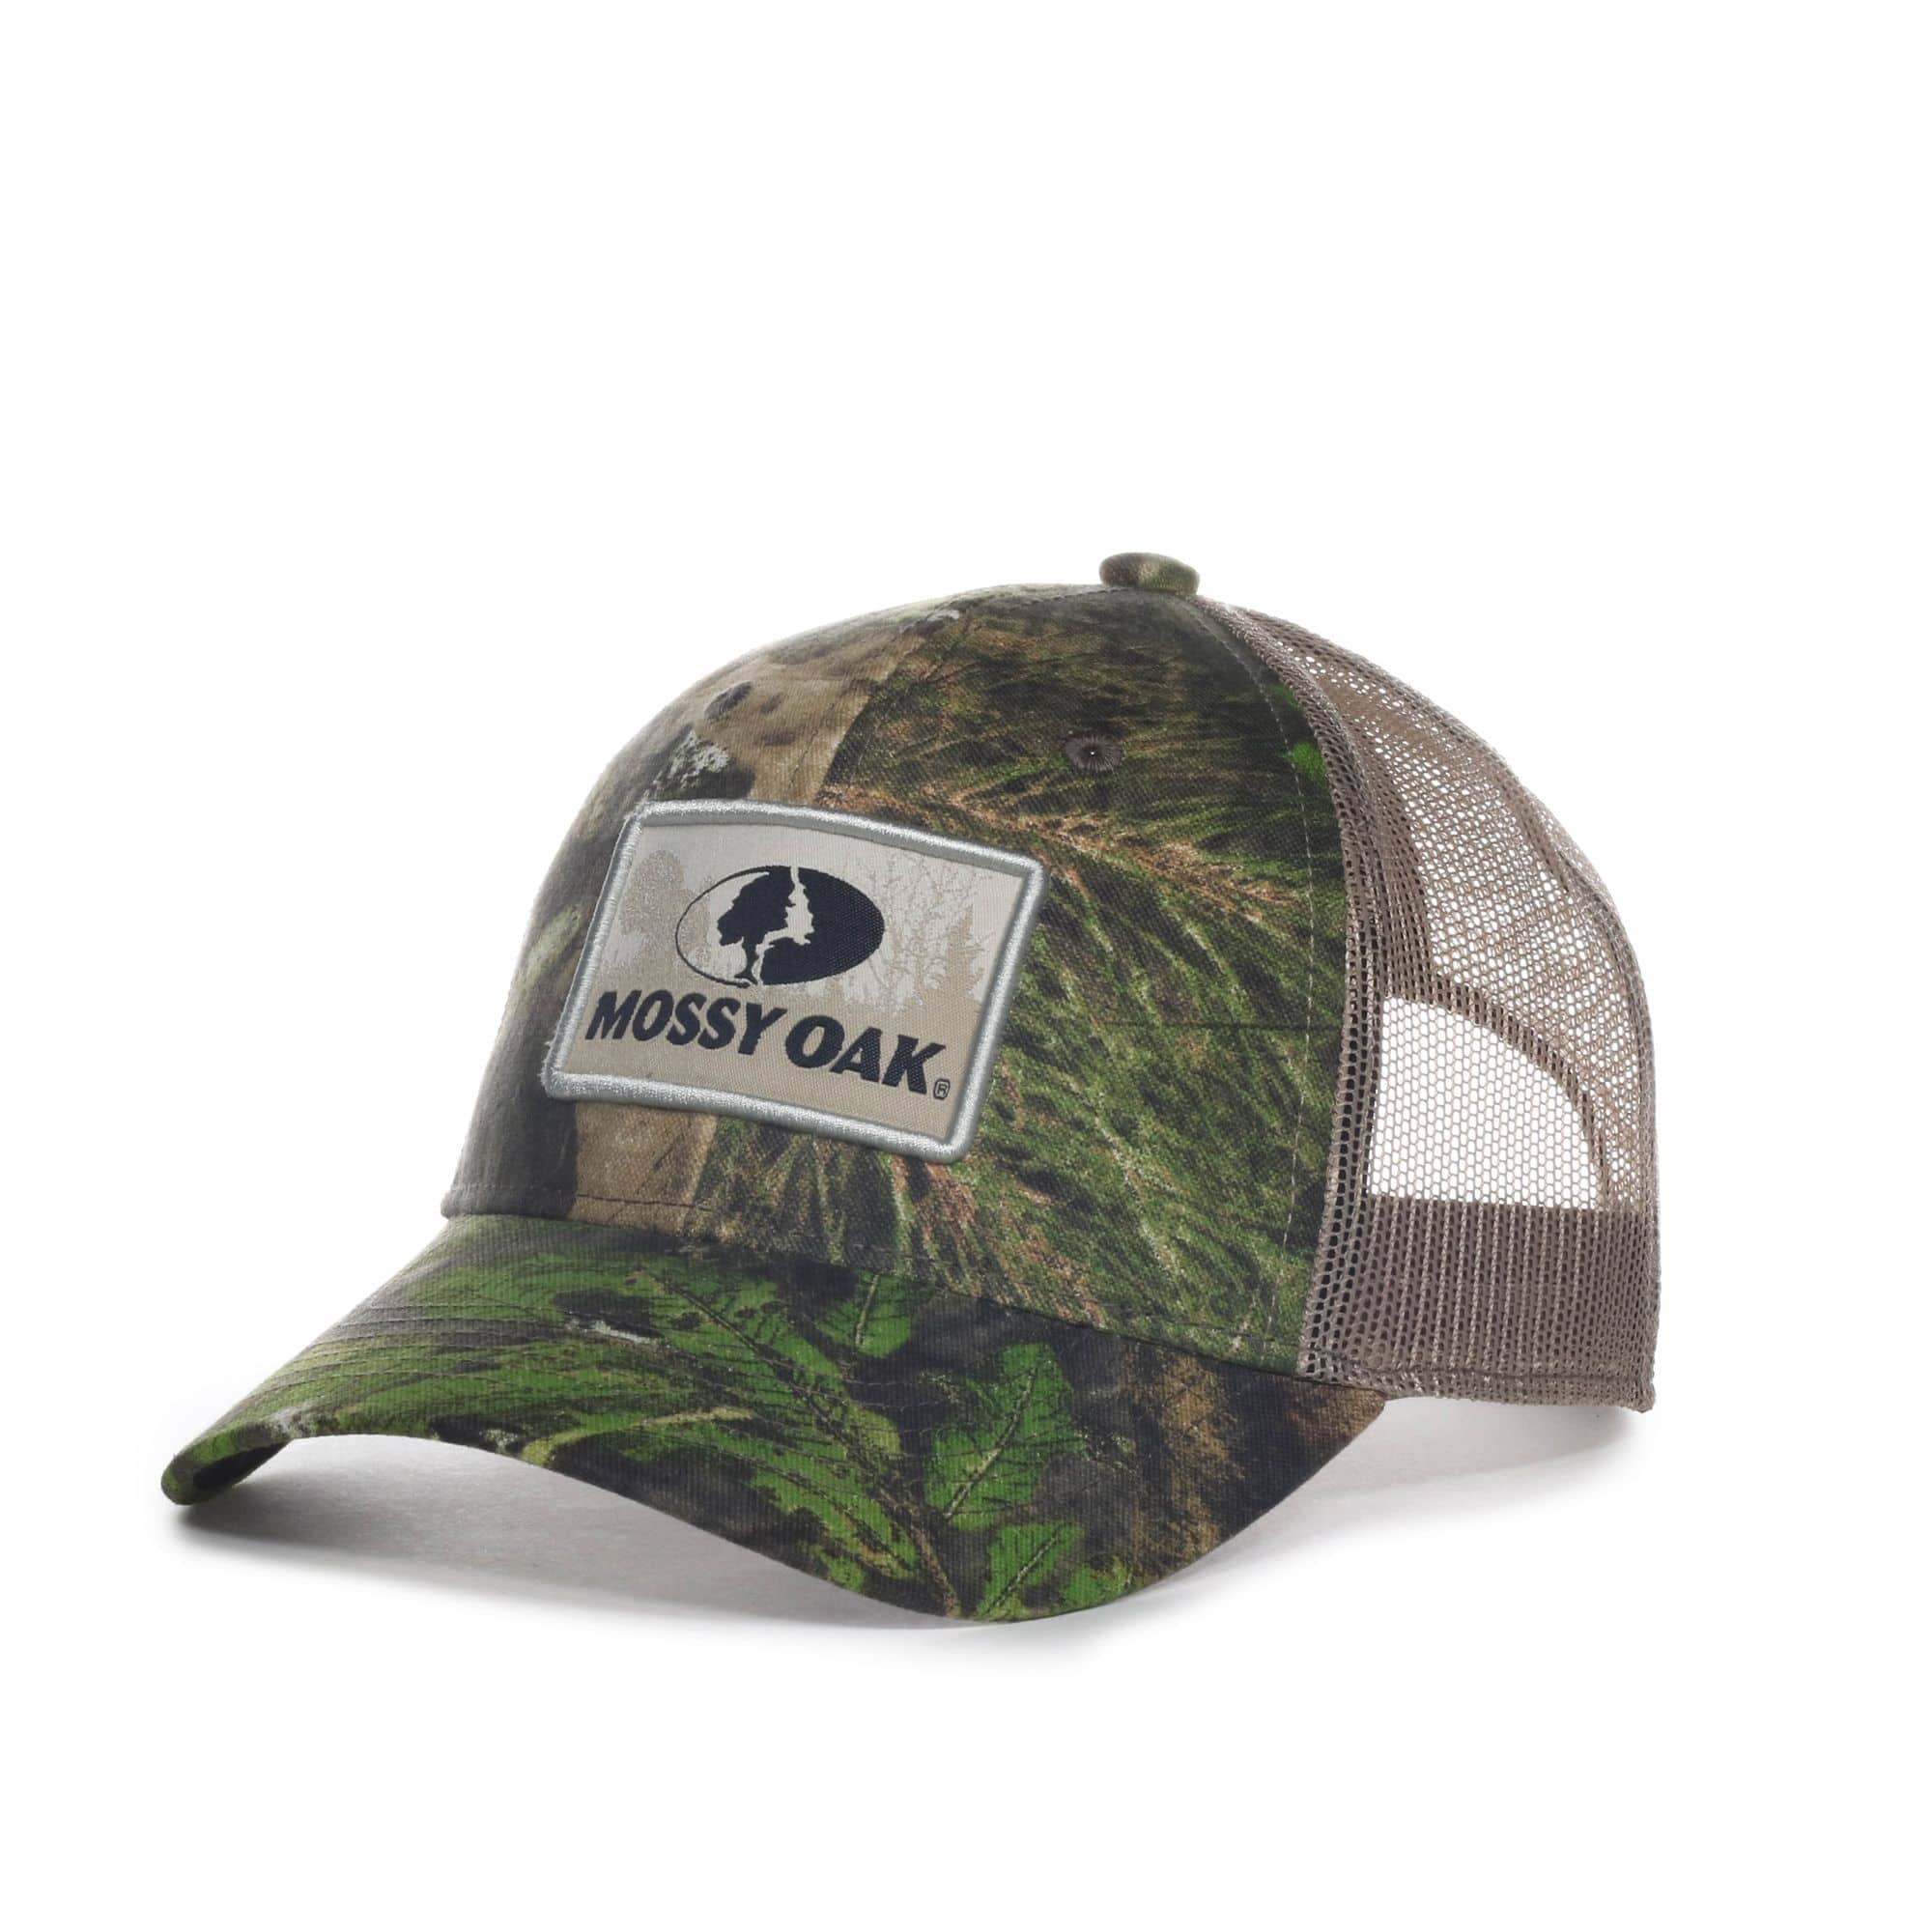 Realtree Edge Camo Deer Patch Brown Mesh Back Unisex Baseball Cap with Snap  Closure, One Size